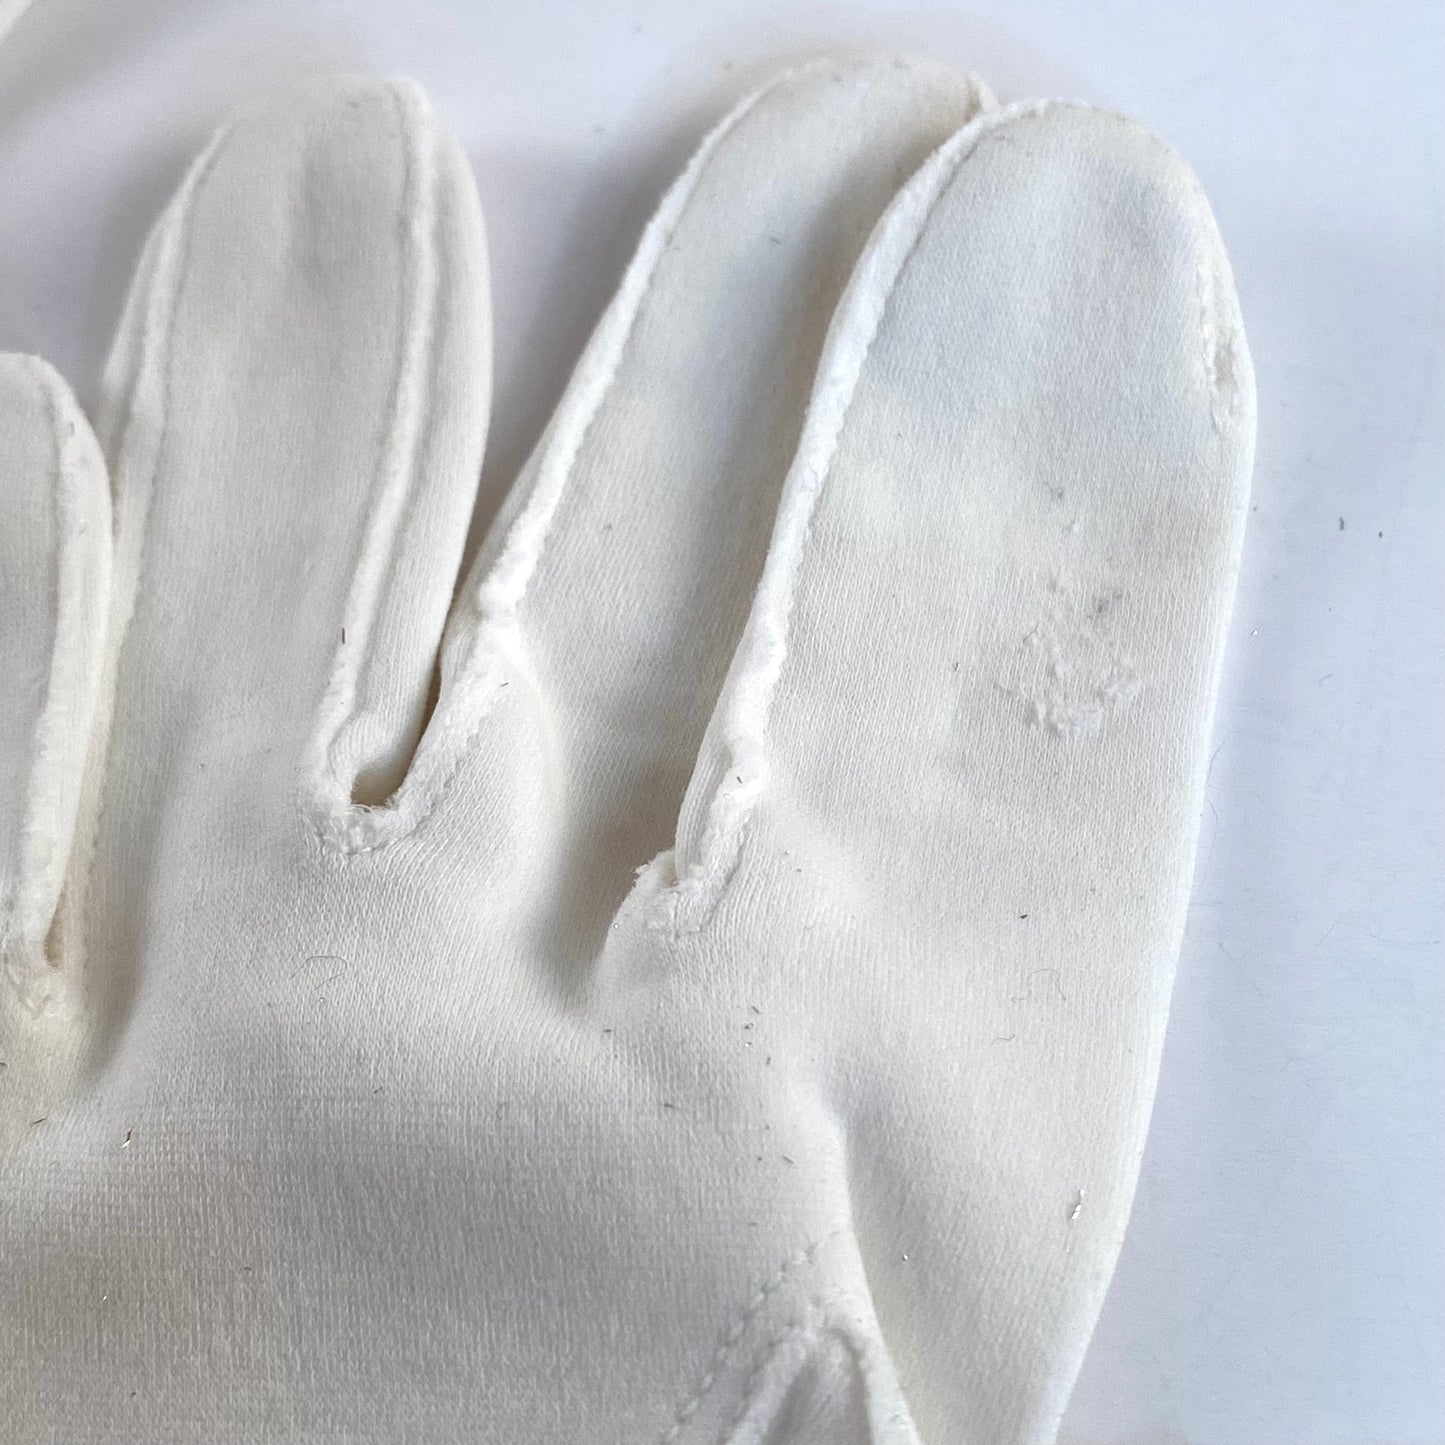 Late 50s/ Early 60s Short Gloves